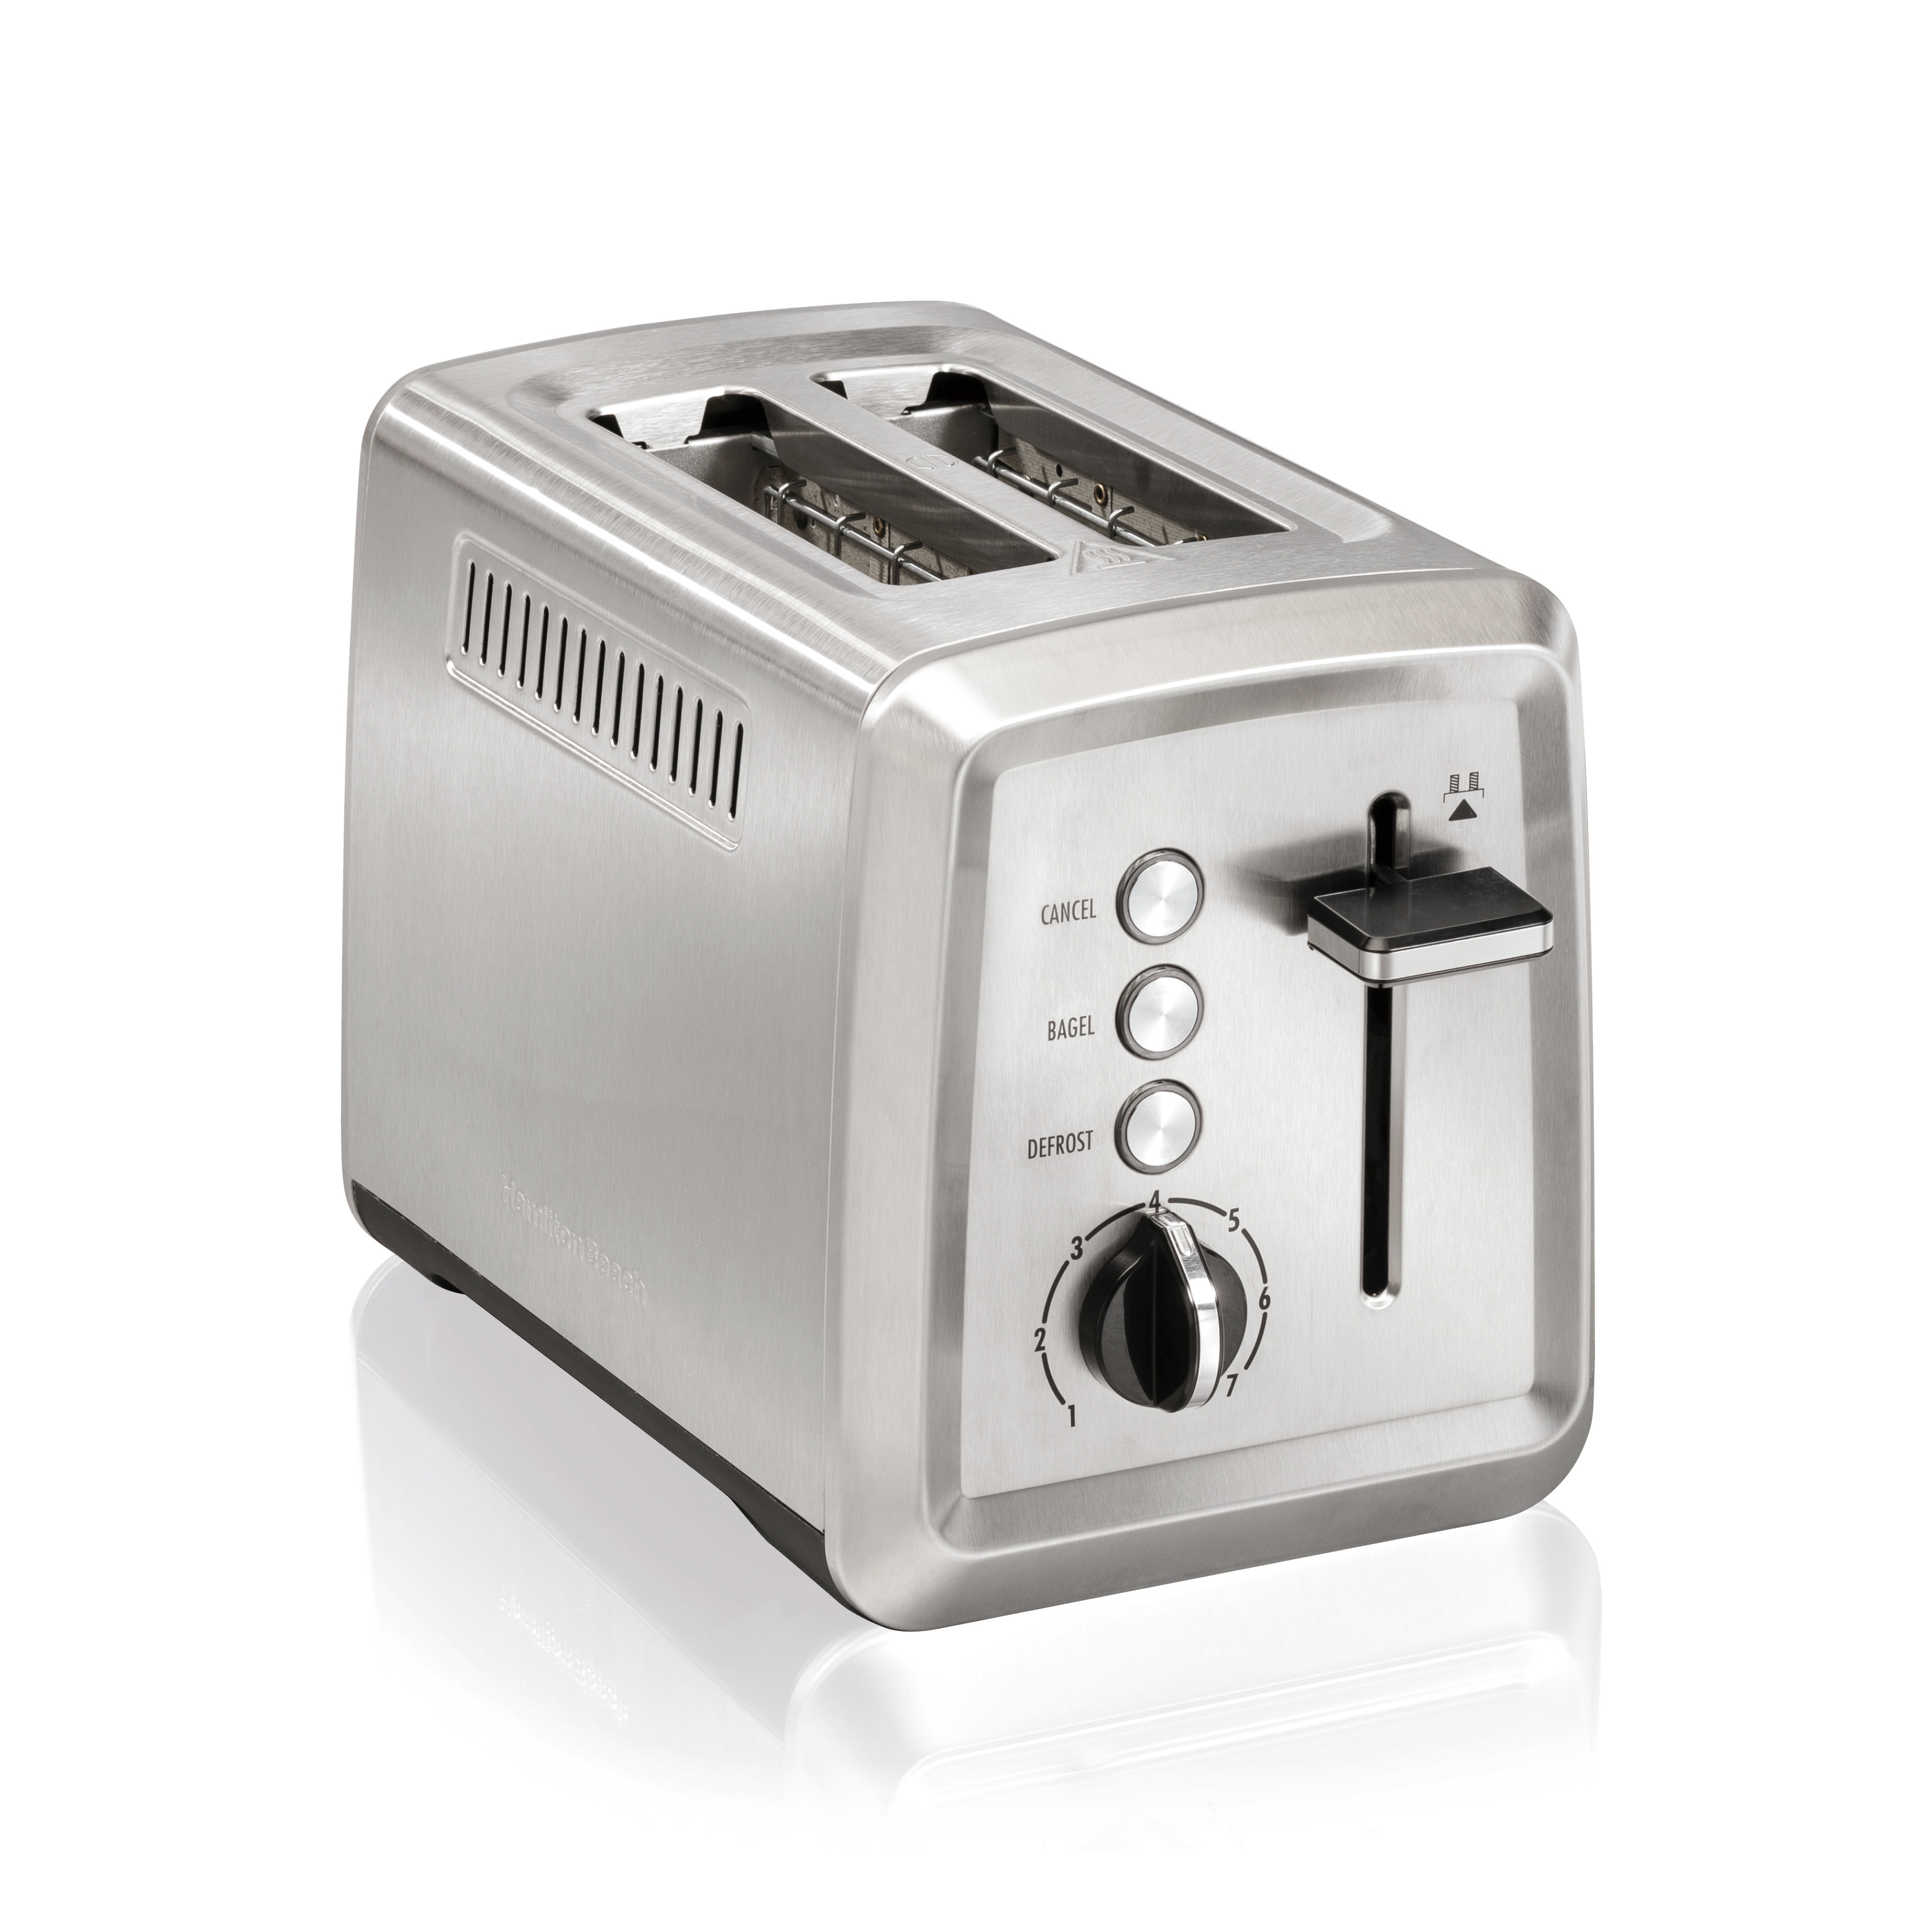 Hamilton Beach 4 Slice Toaster with Extra-Wide Slots, Bagel Setting, Toast  Boost, Slide-Out Crumb Tray, Auto-Shutoff & Cancel Button, Stainless Steel